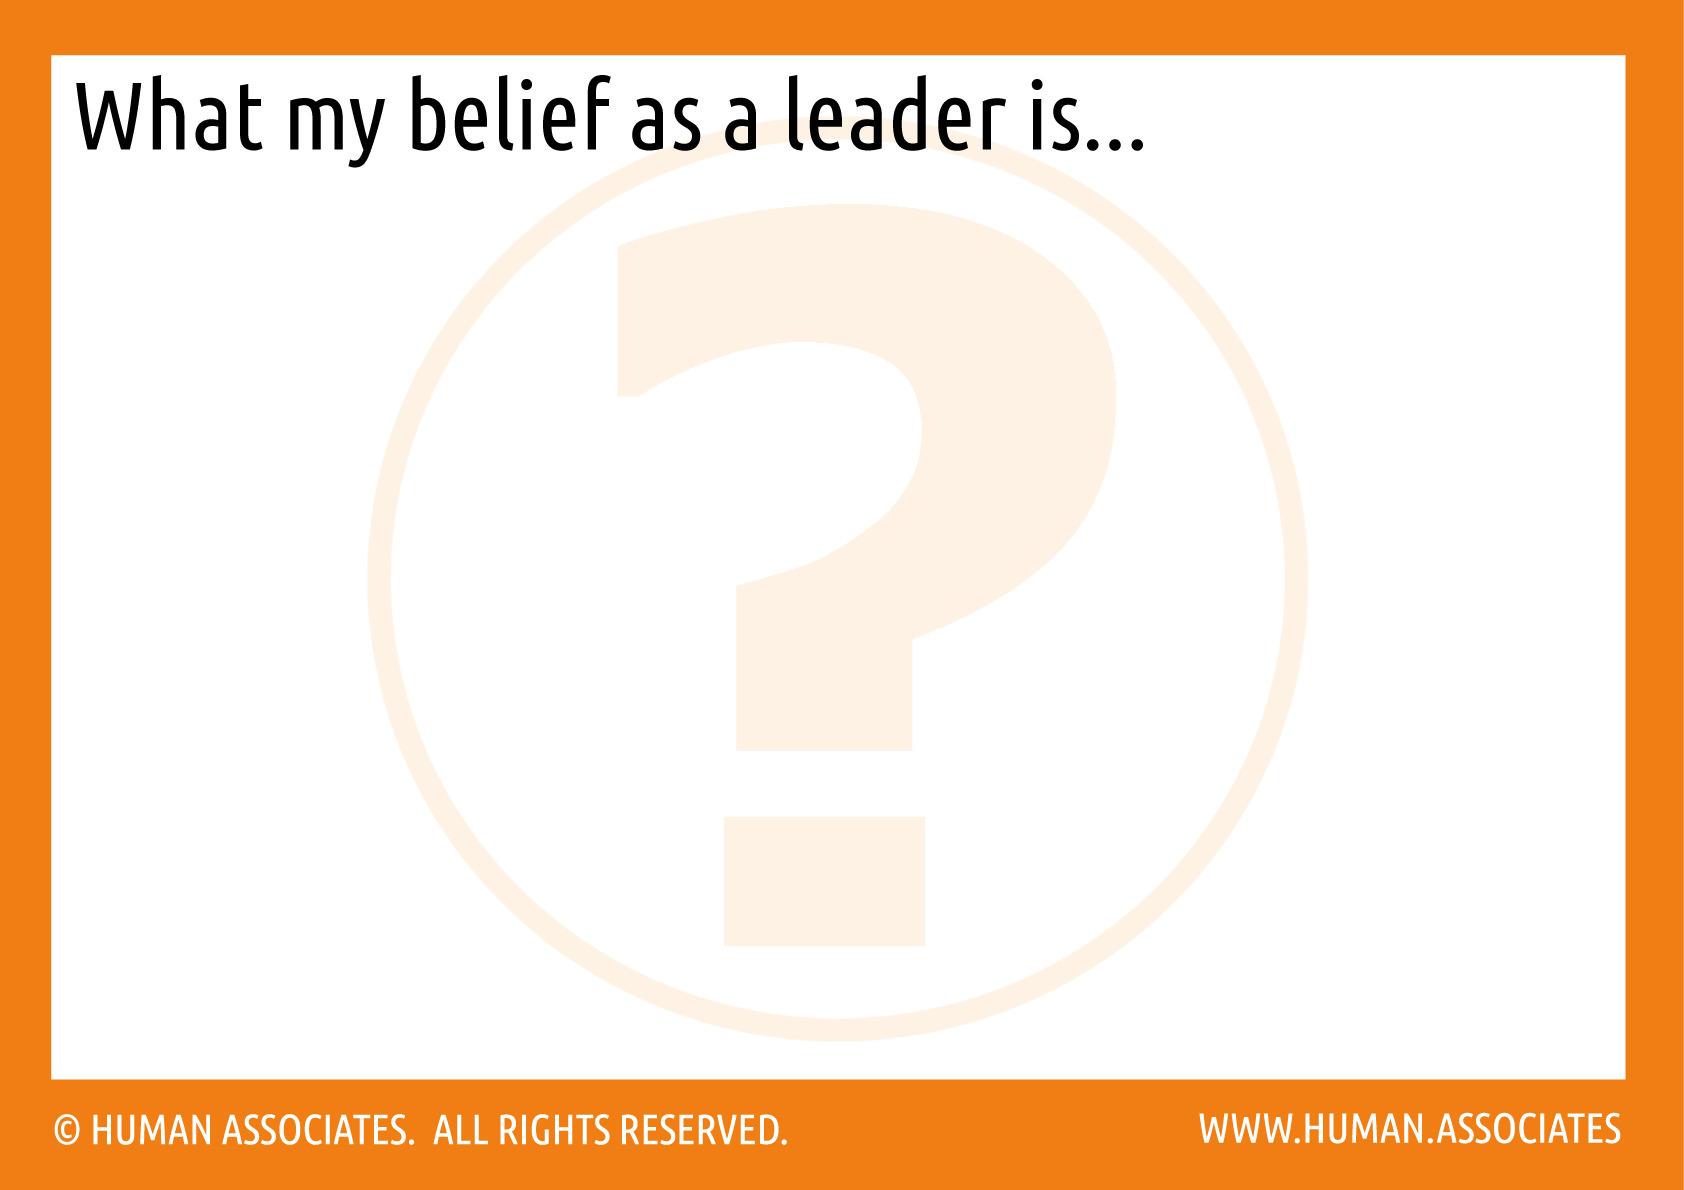 What Do You Believe As A Leader? Response